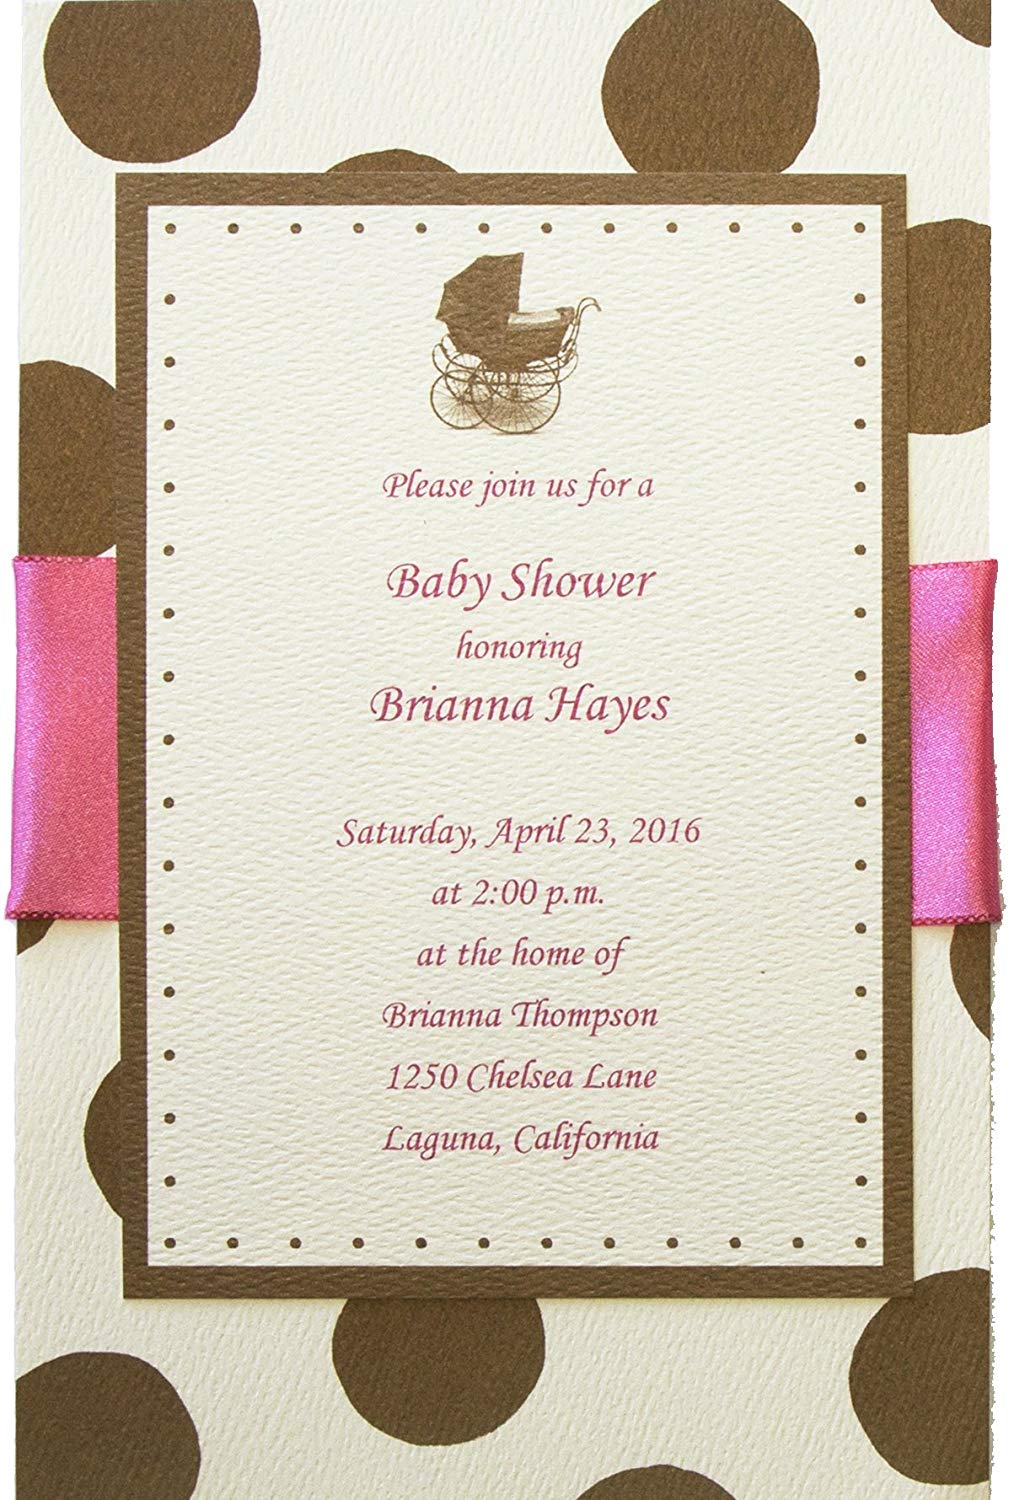 Full Size of Baby Shower:cheap Invitations Baby Shower Pinterest Baby Shower Ideas For Girls Baby Girl Themed Showers Pinterest Nursery Ideas Nursery For Girls Baby Shower Ideas For Girls Baby Girl Themes For Baby Shower Pinterest Nursery Ideas